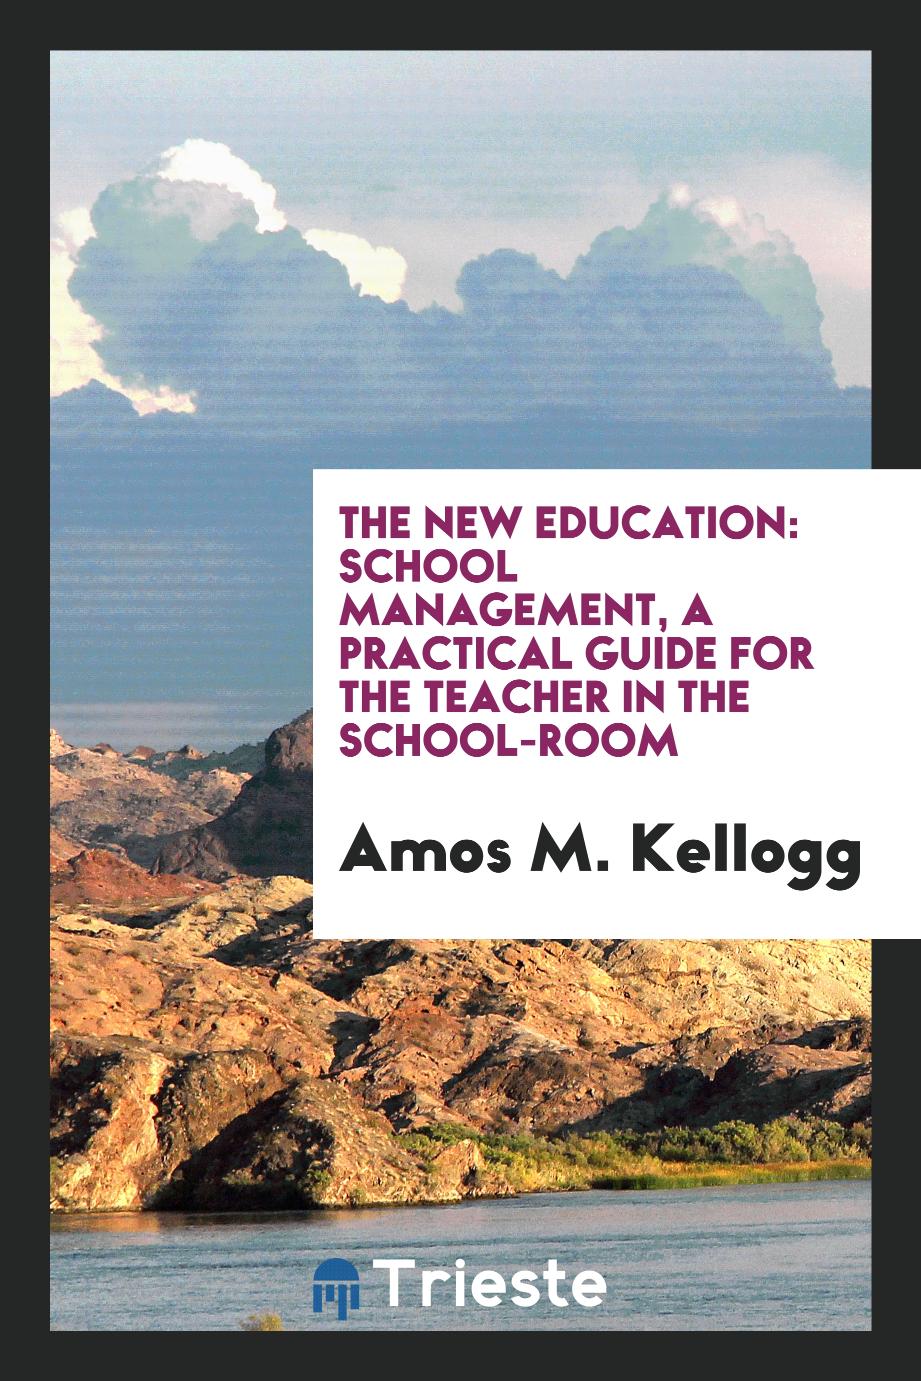 The New Education: School Management, a Practical Guide for the Teacher in the School-Room